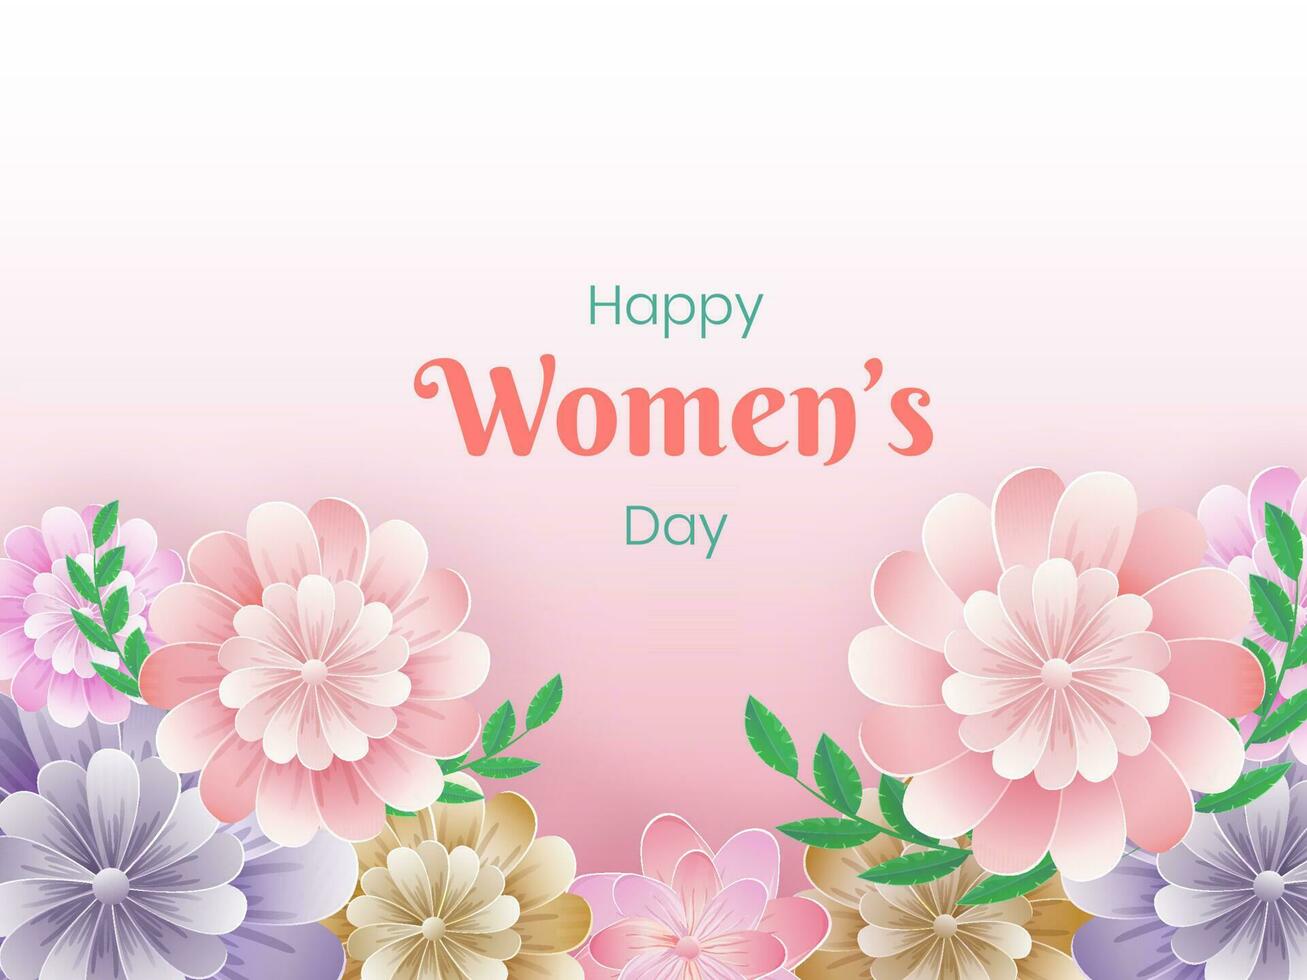 Happy Women's Day Greeting Card With Beautiful Flowers And Leaves ...